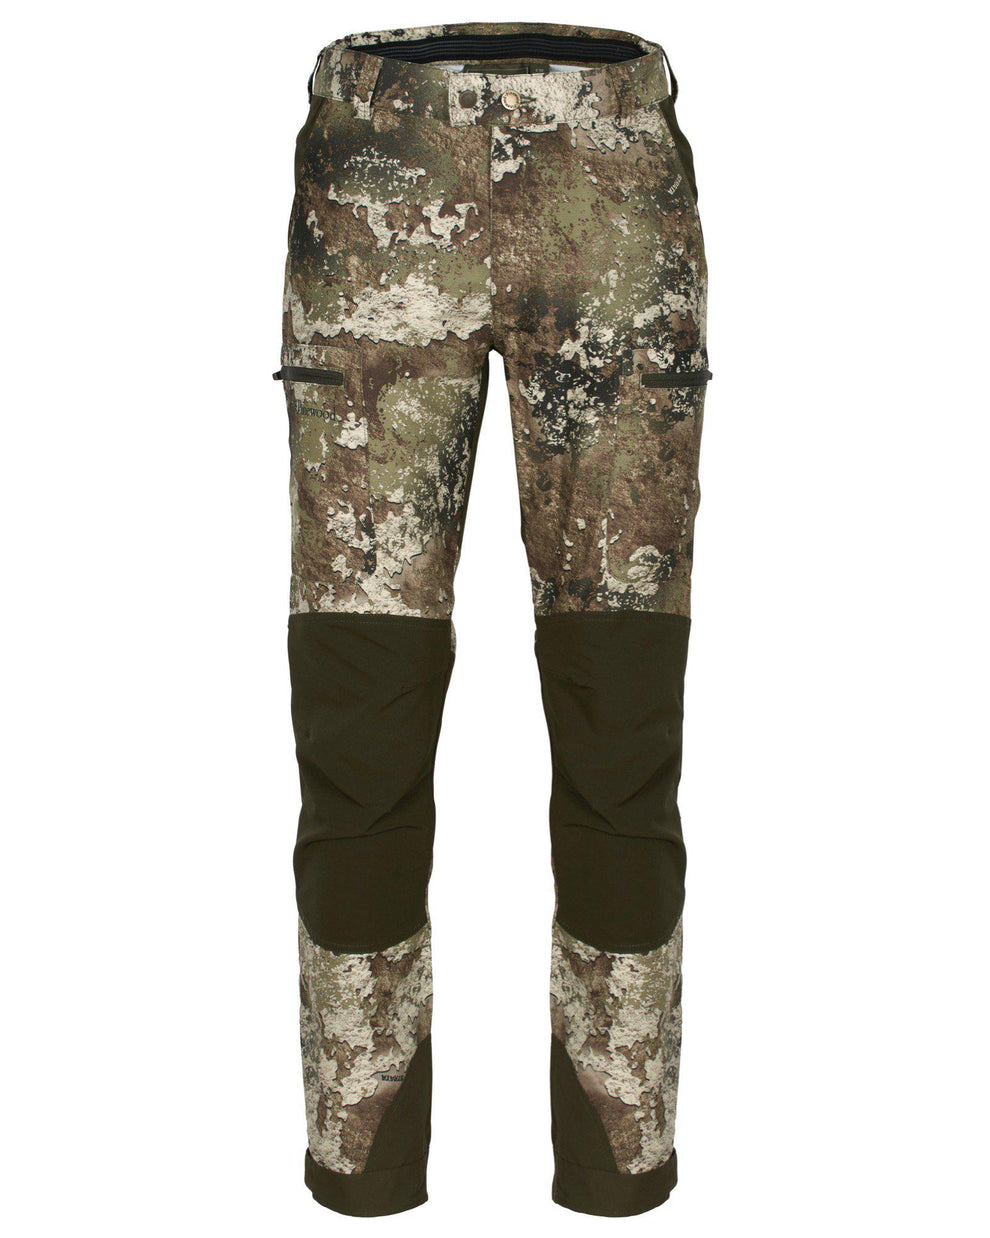 5685-989-01_Pinewood-Caribou-Hunt-Camou-Trousers-Mens_Strata-Moss-Green